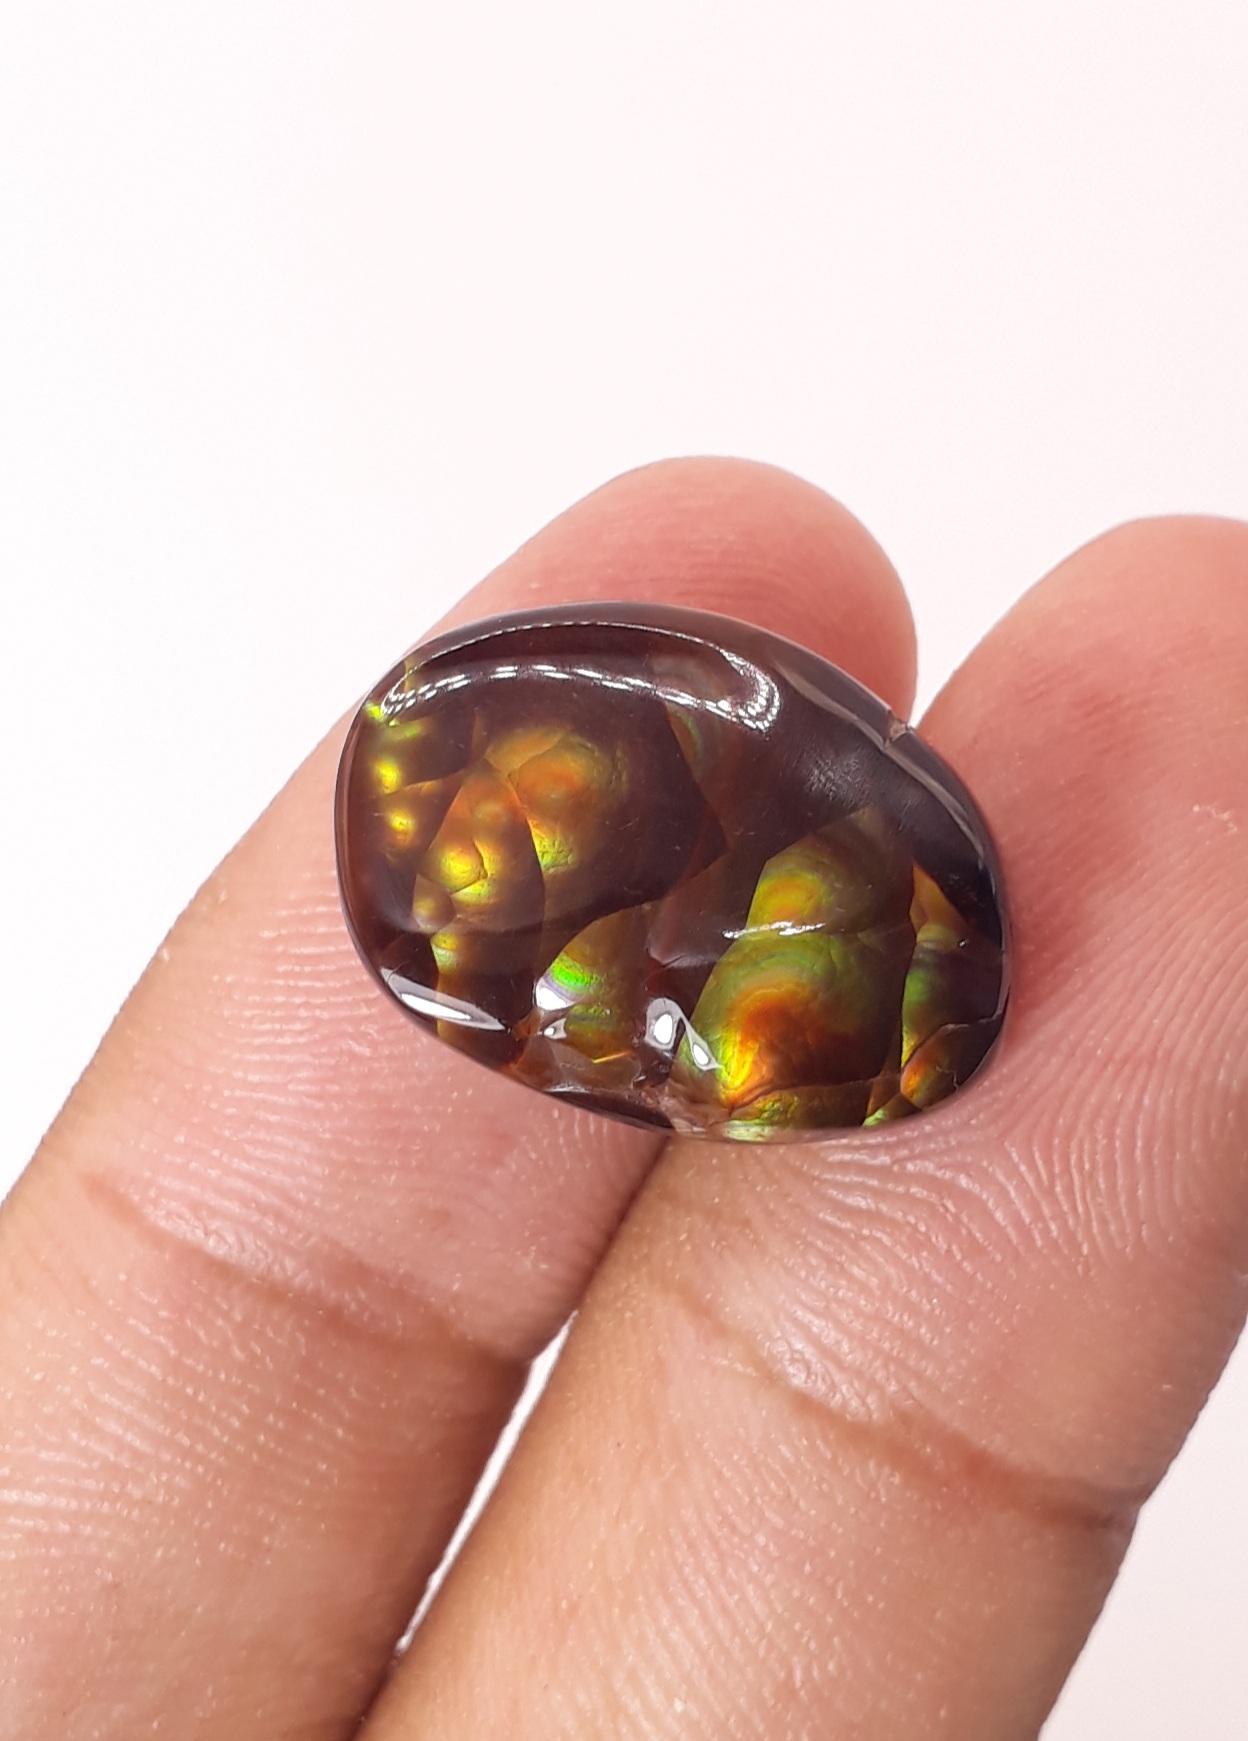 16.9ct Rainbow Bubbly Mexican Fire Agate,  Rare Fire Agate, Oval Cabochon Fire Agate - Perfect gemstone Gift, Rare Gemstone than Diamonds, Dimensions 20 x 14.5mm